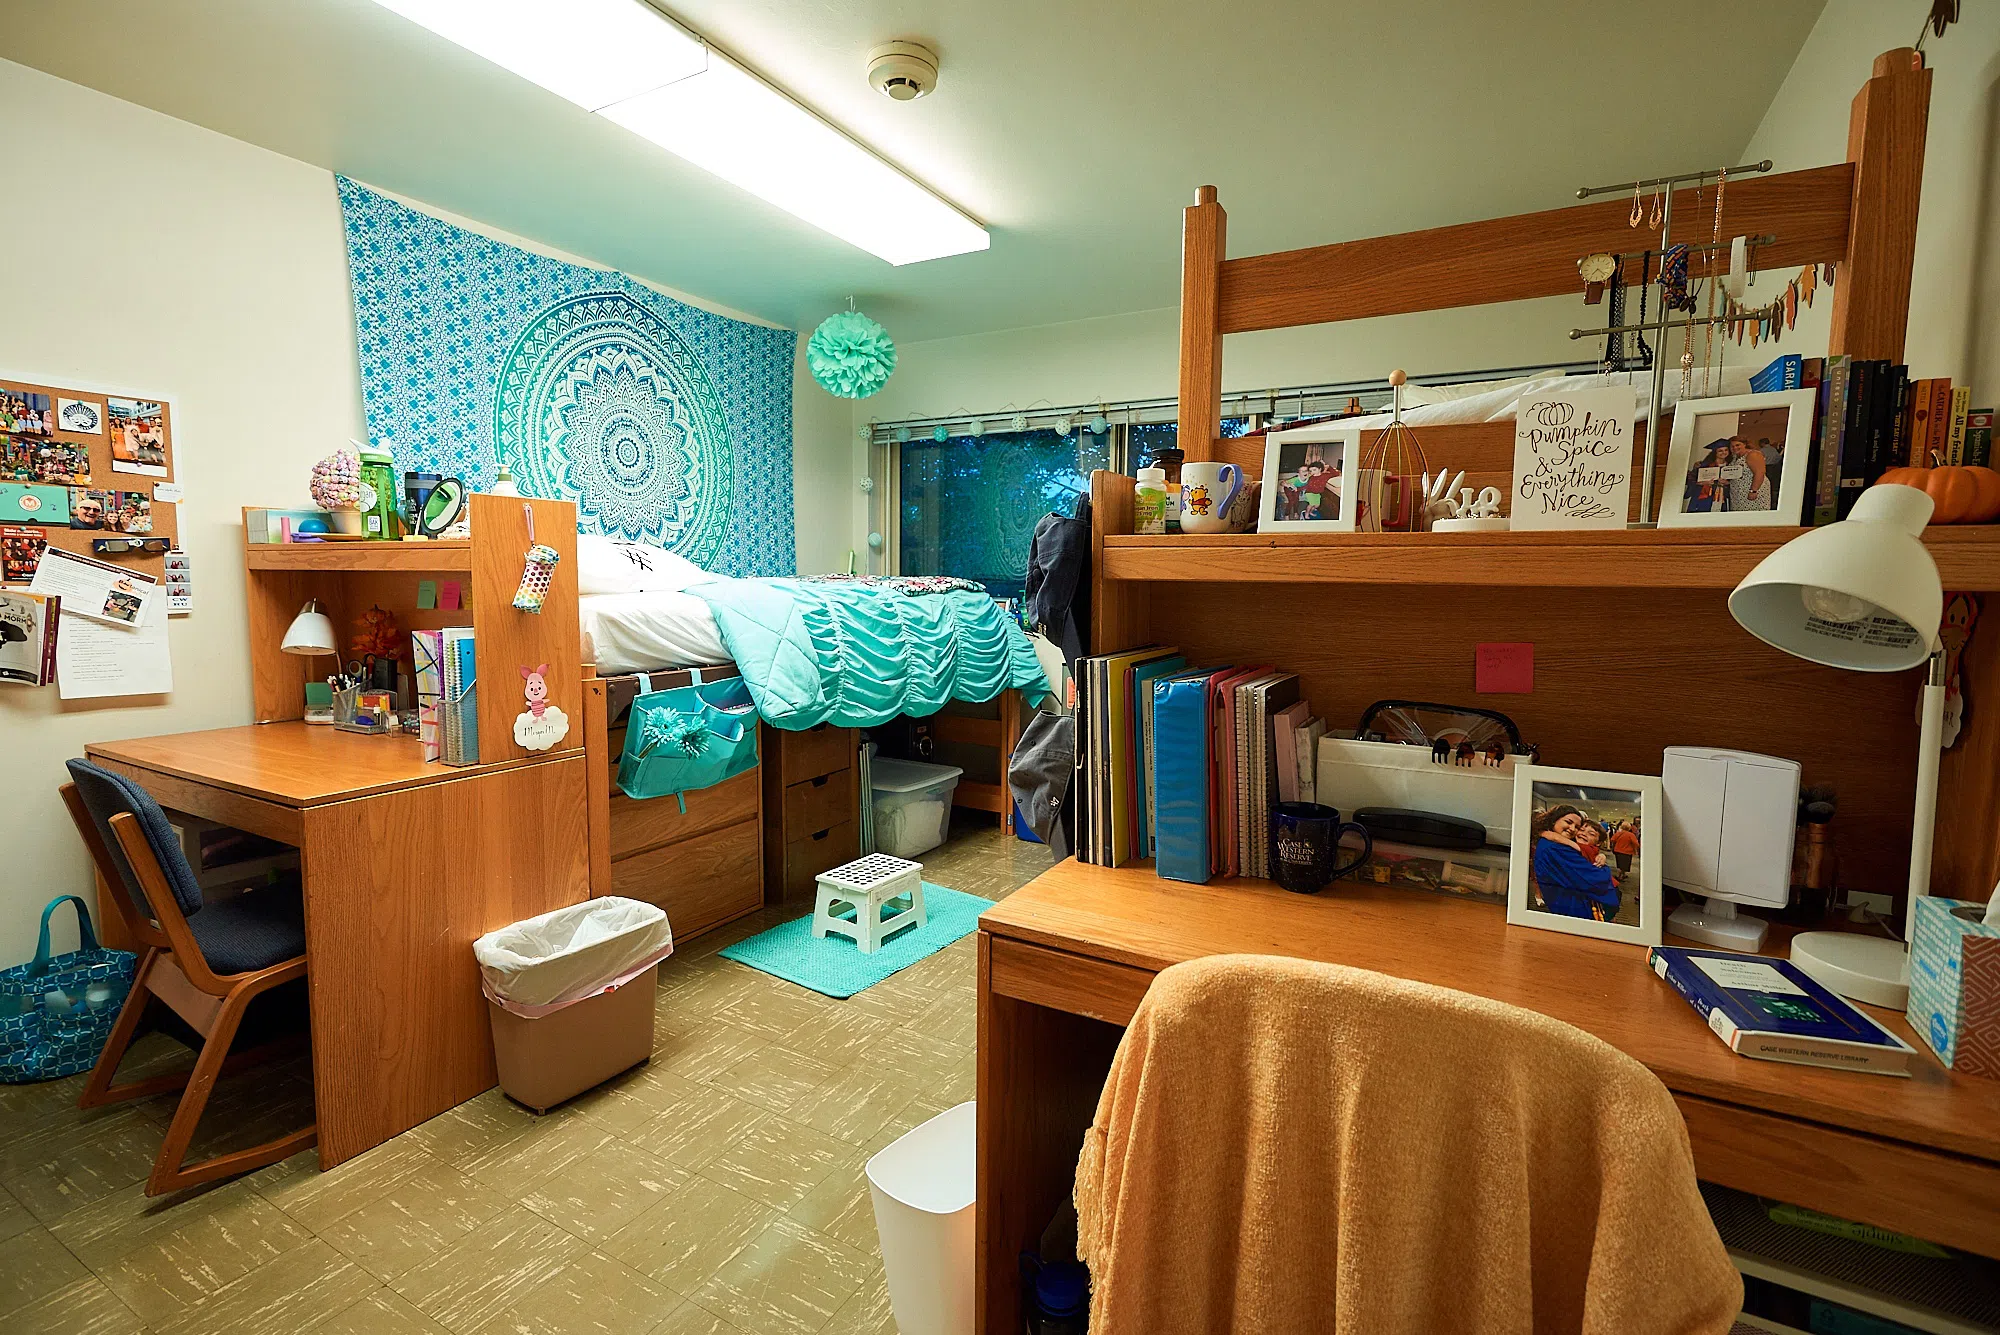 Interior of a typical residence hall room